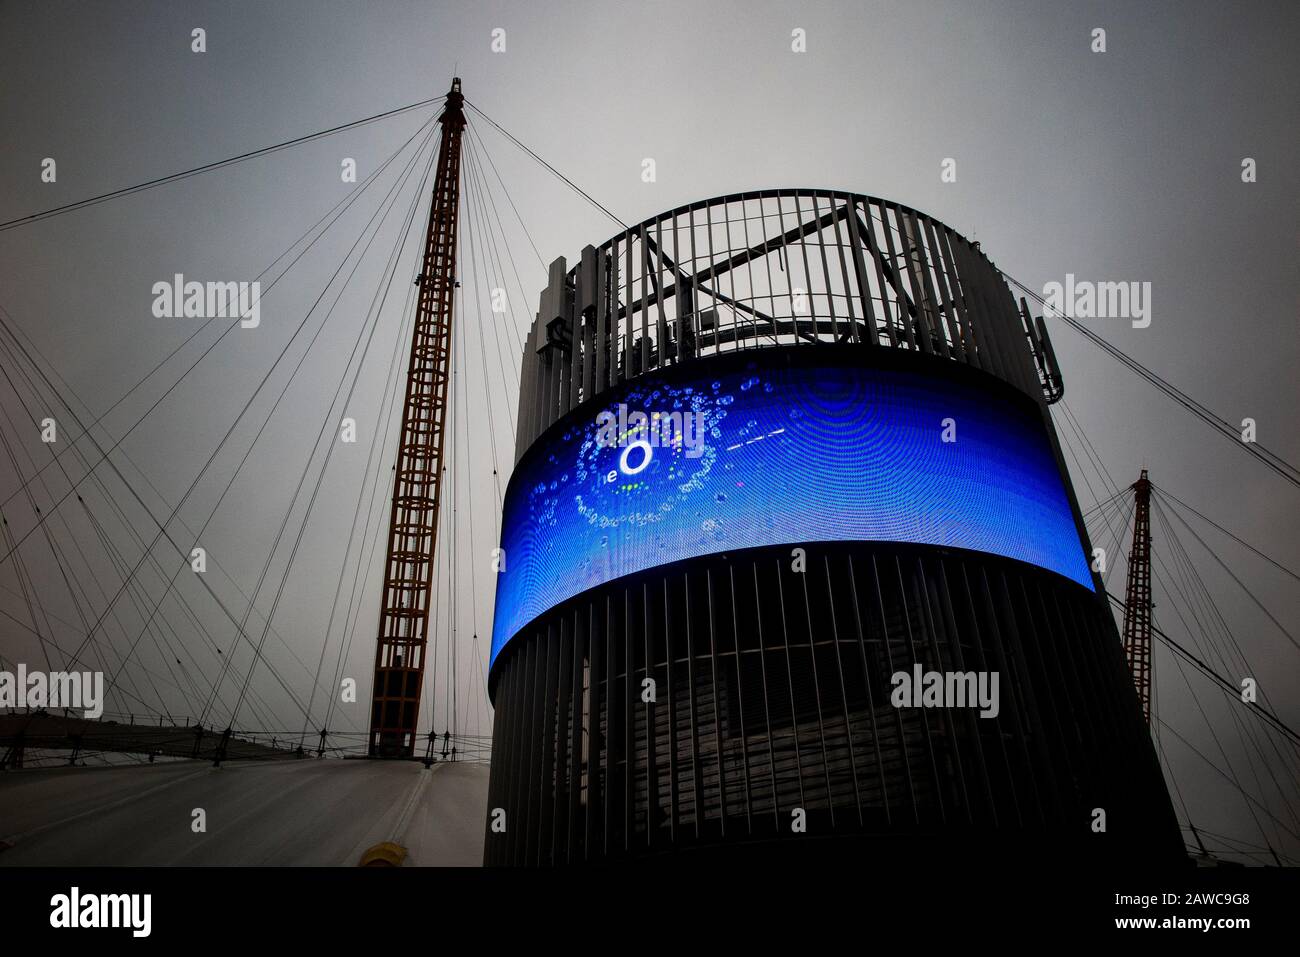 The exterior of the O2 Millennium Dome in North Greenwich, London with an electronic advertising hoarding from O2 Stock Photo